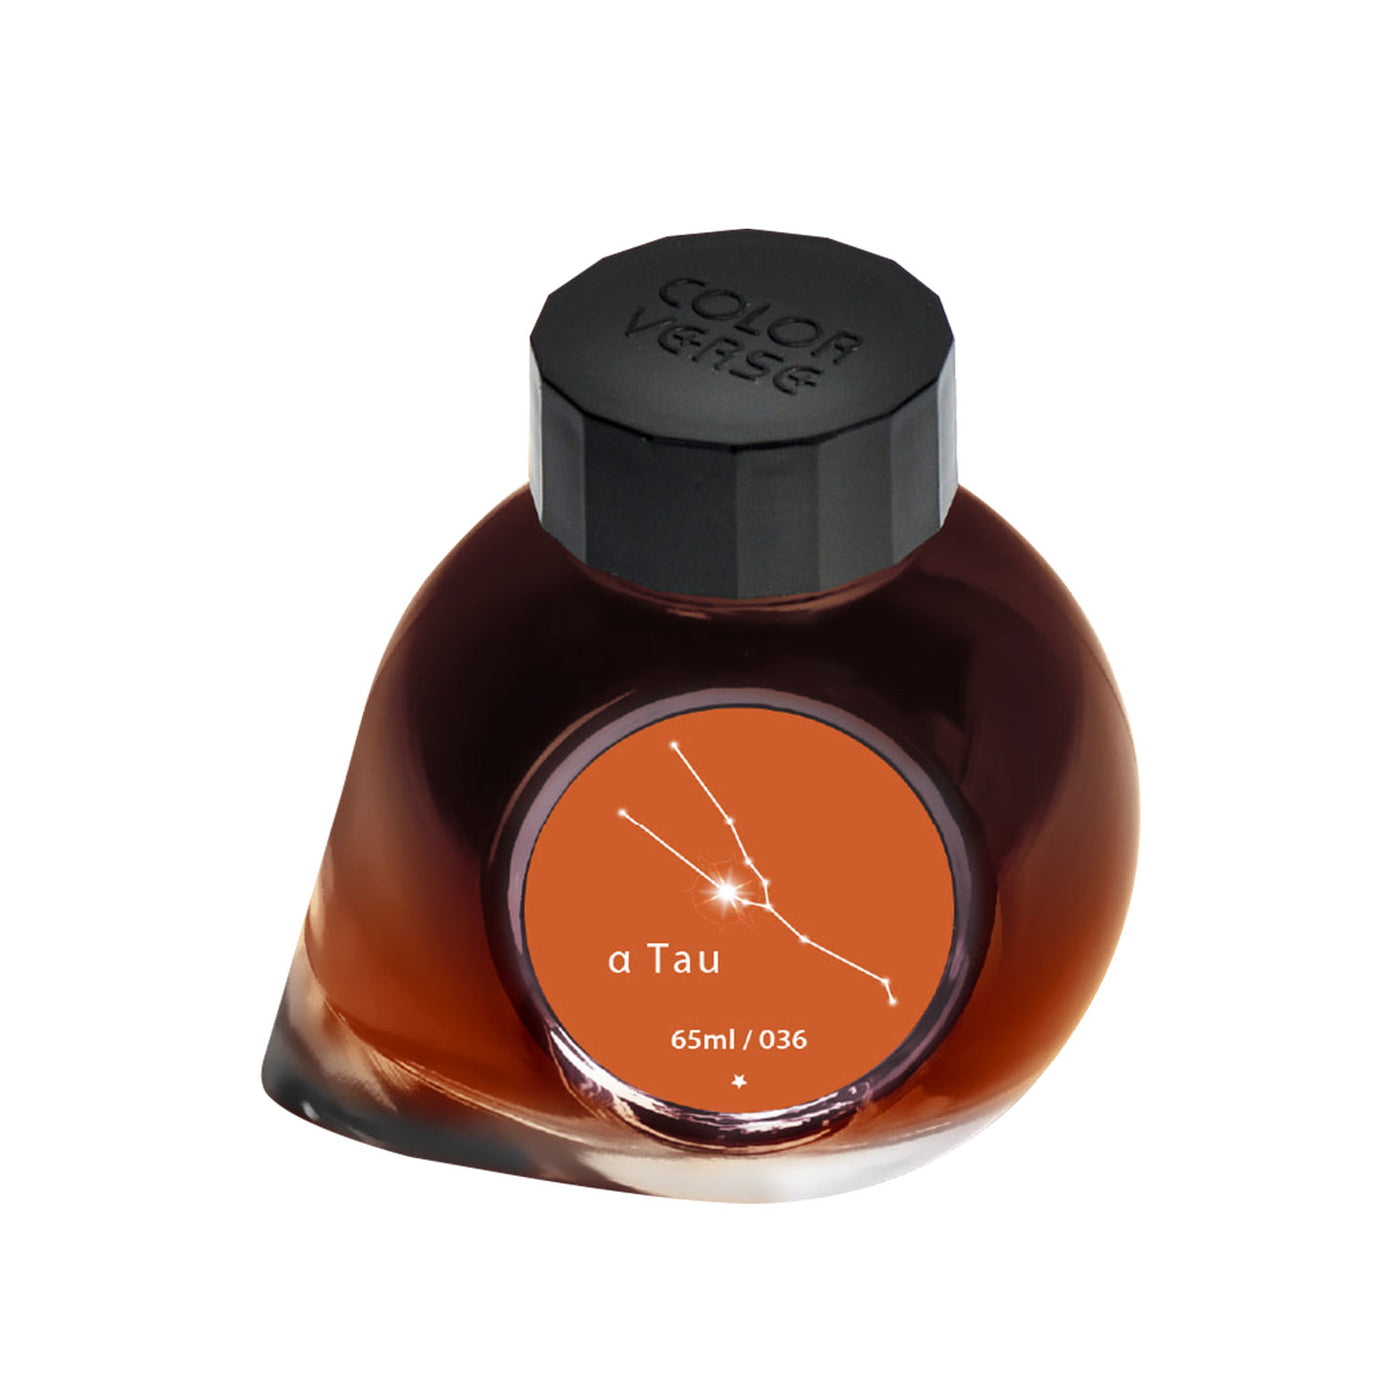 Colorverse Project Constellation II α Tau Ink Bottle, Red - 65ml